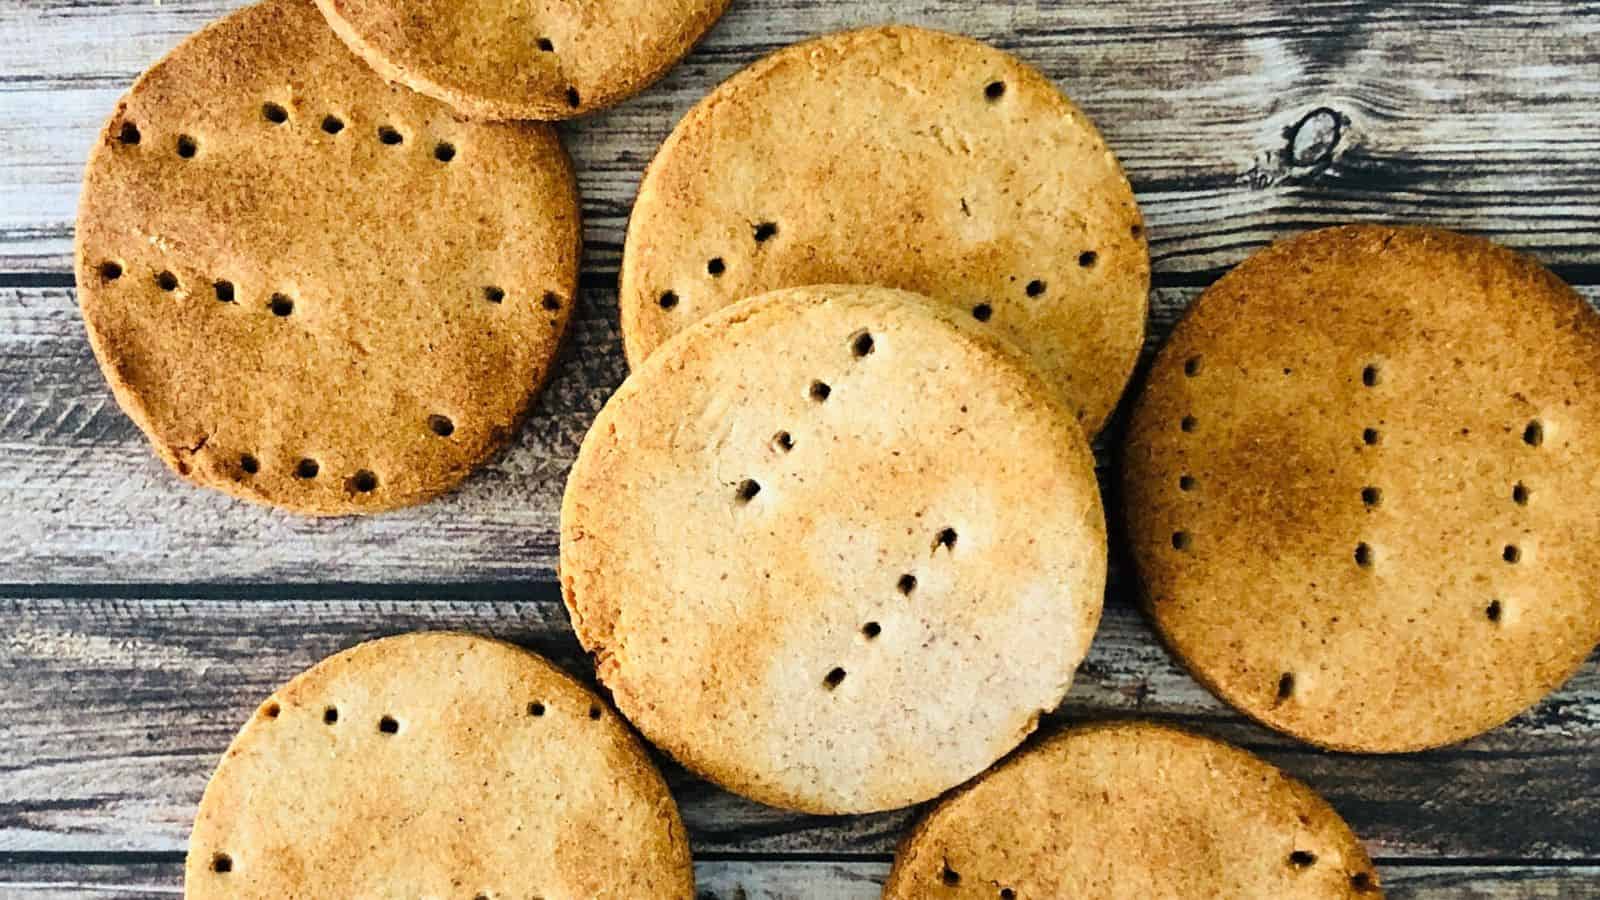 Seven pieces of round, evenly-baked biscuits with small holes arranged on a wooden surface.